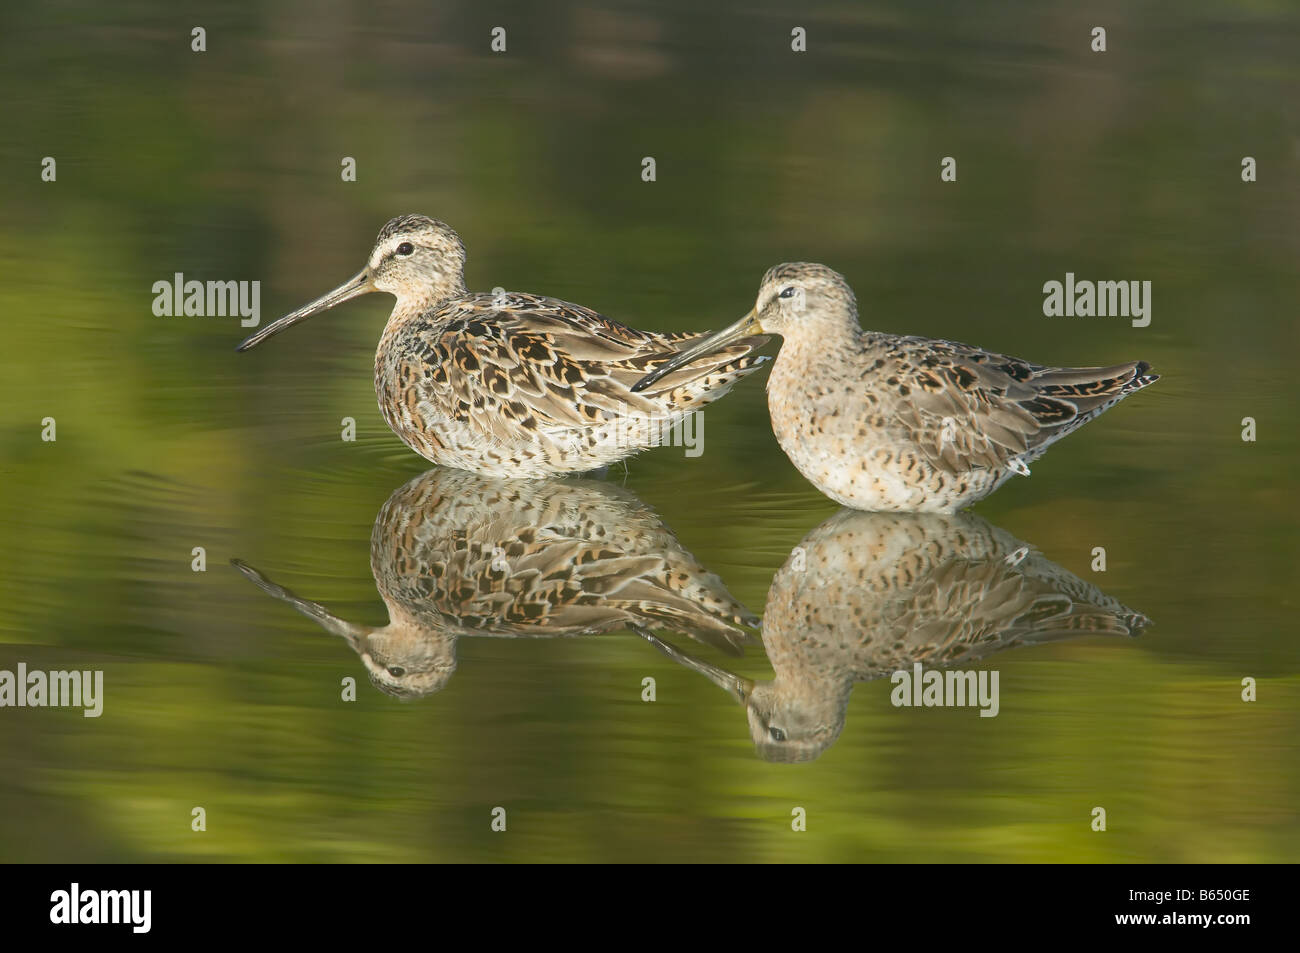 Two Short-billed Dowitchers (Limnodromus griseus) standing in shallow water with green trees reflected Stock Photo